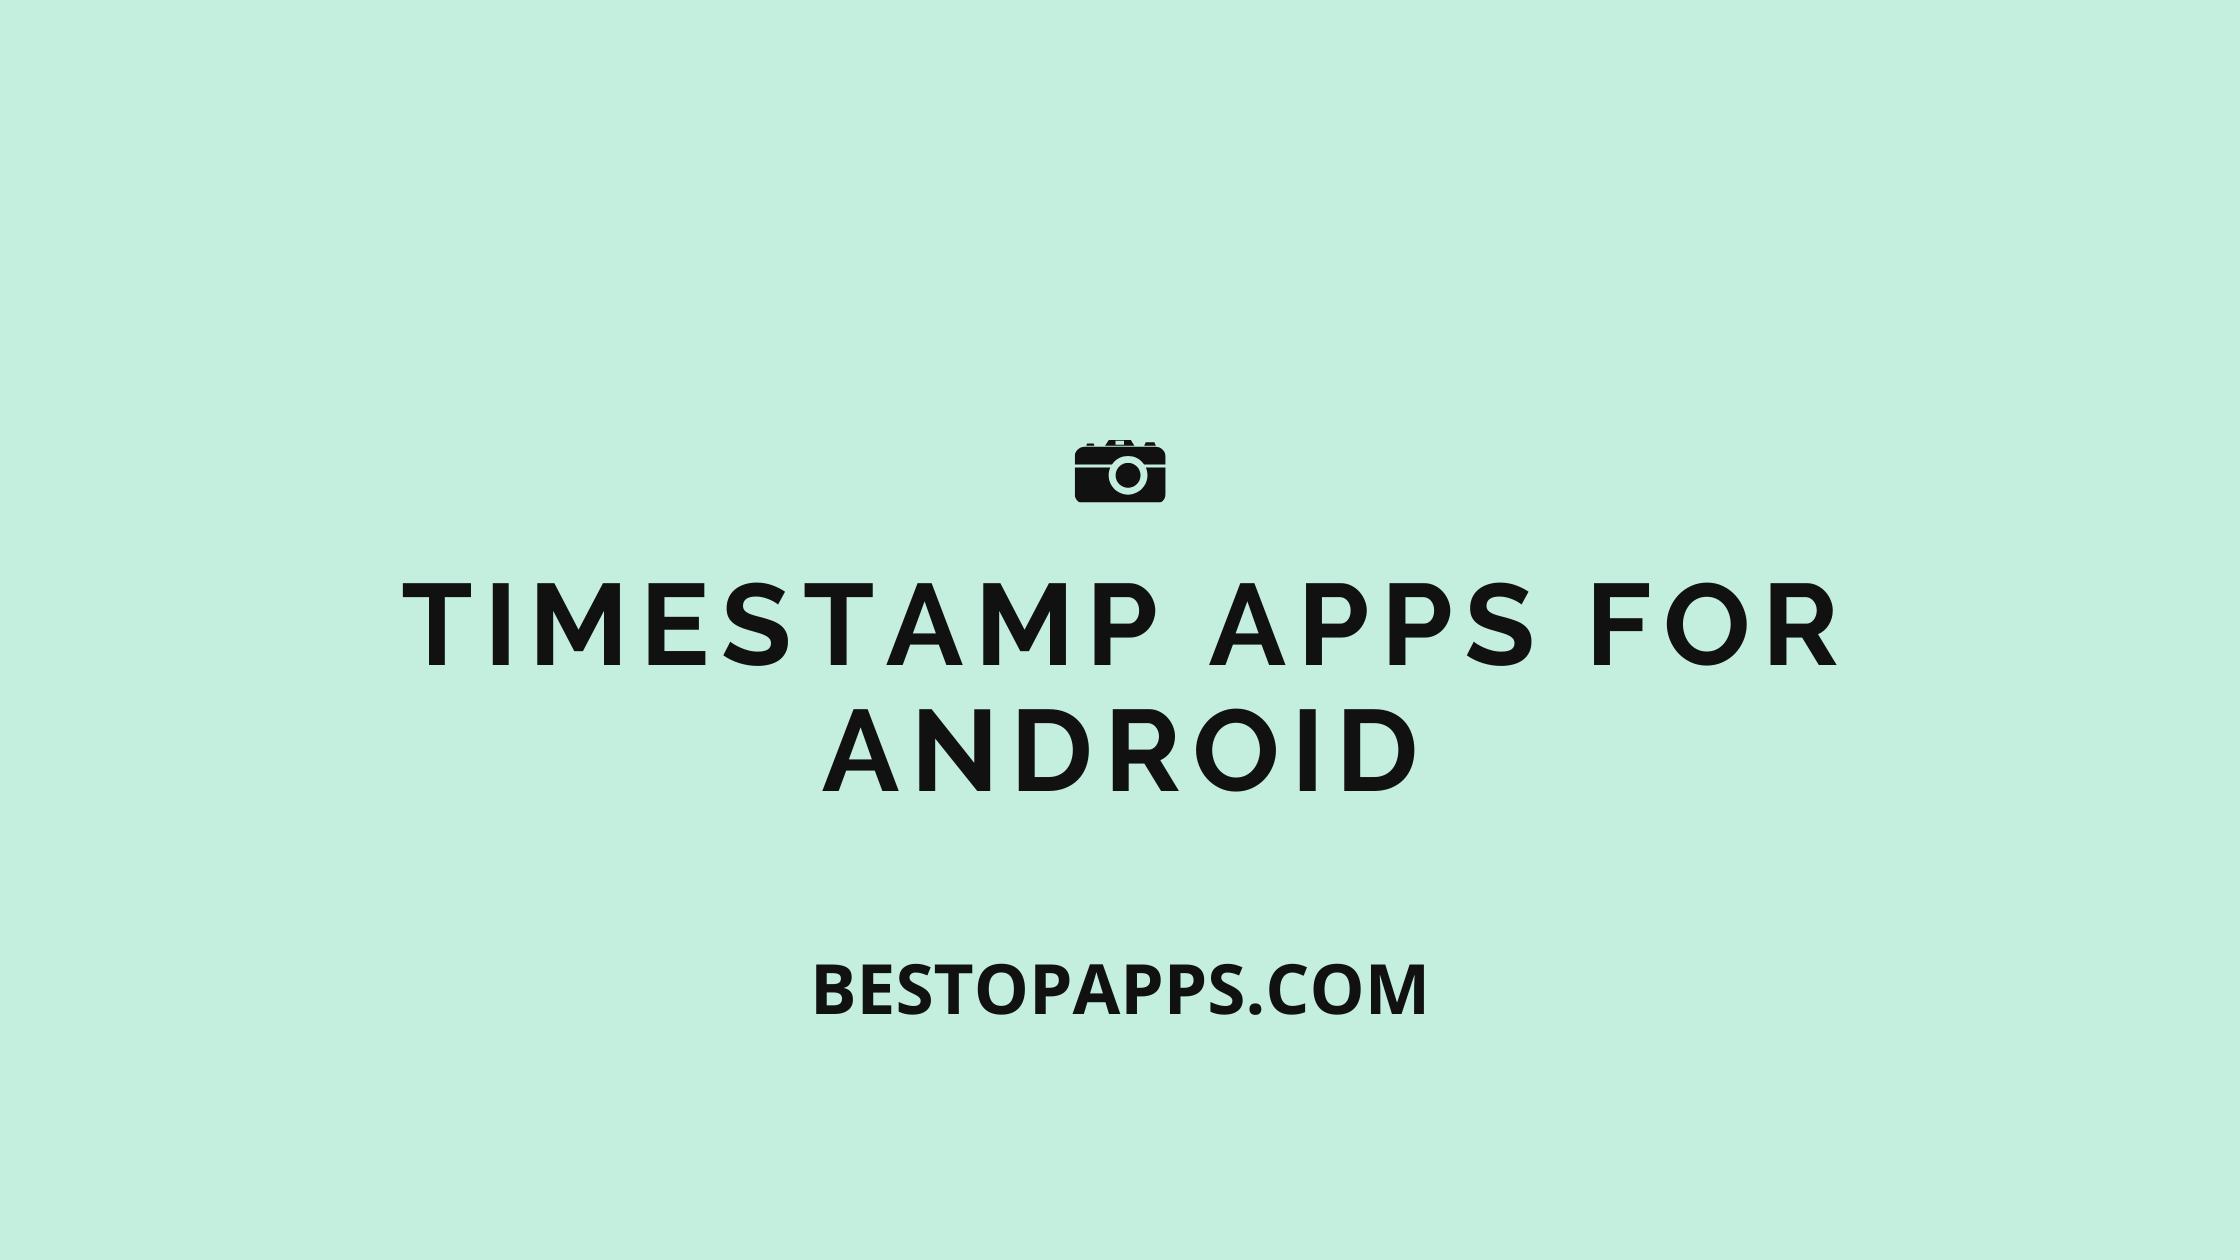 Timestamp Apps for Android